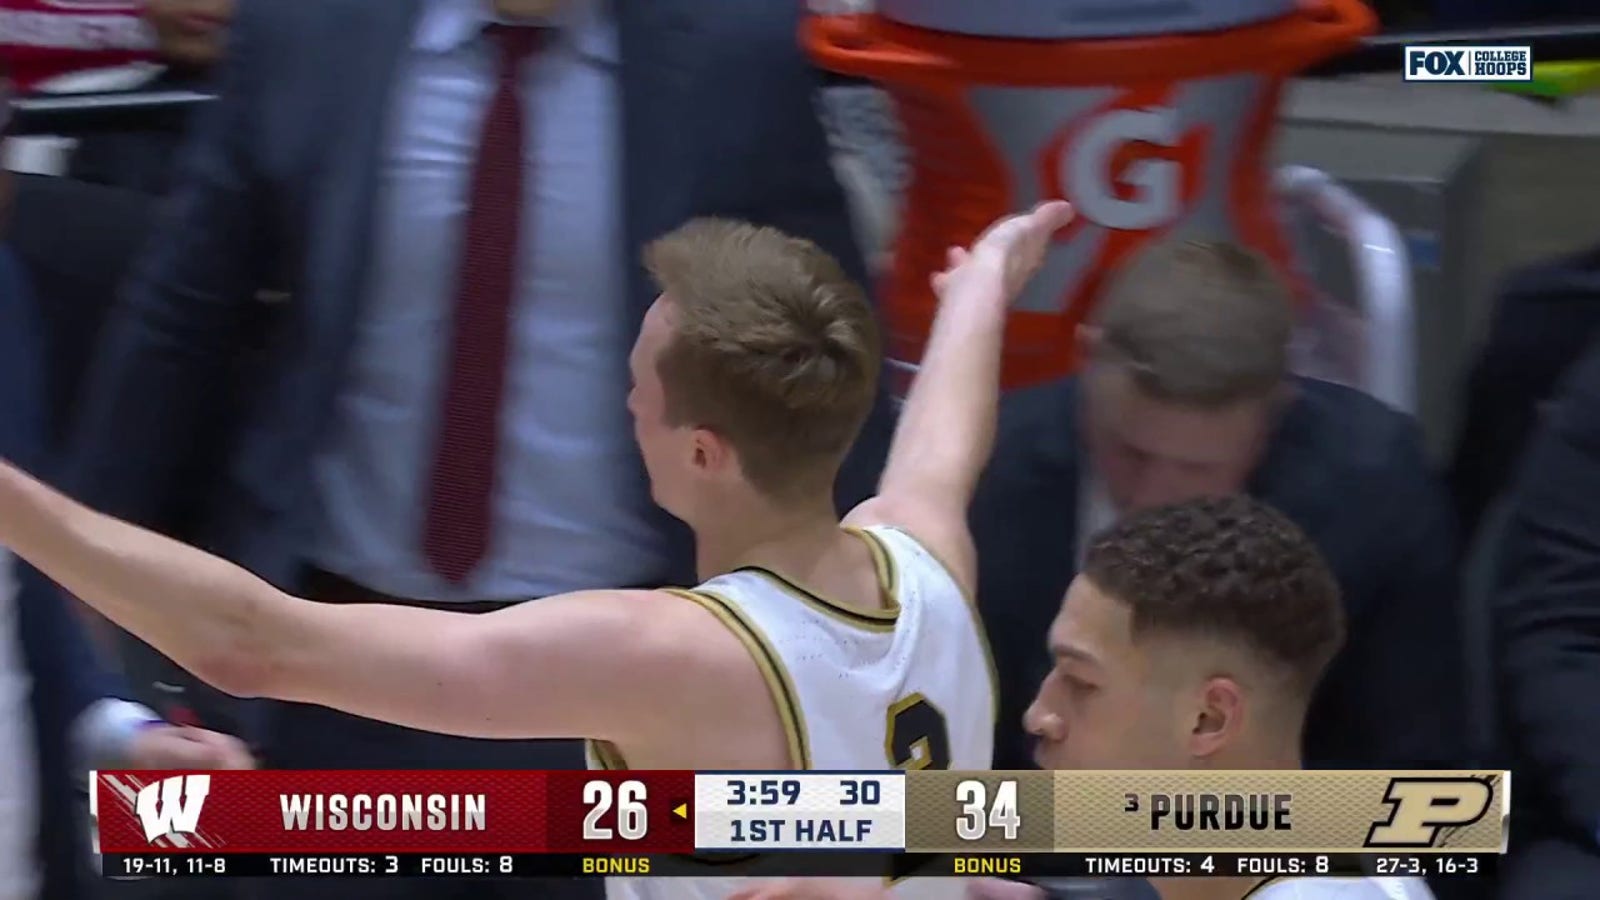 Fletcher Loyer hits a 3-pointer, plus a foul to extend Purdue's lead vs. Wisconsin